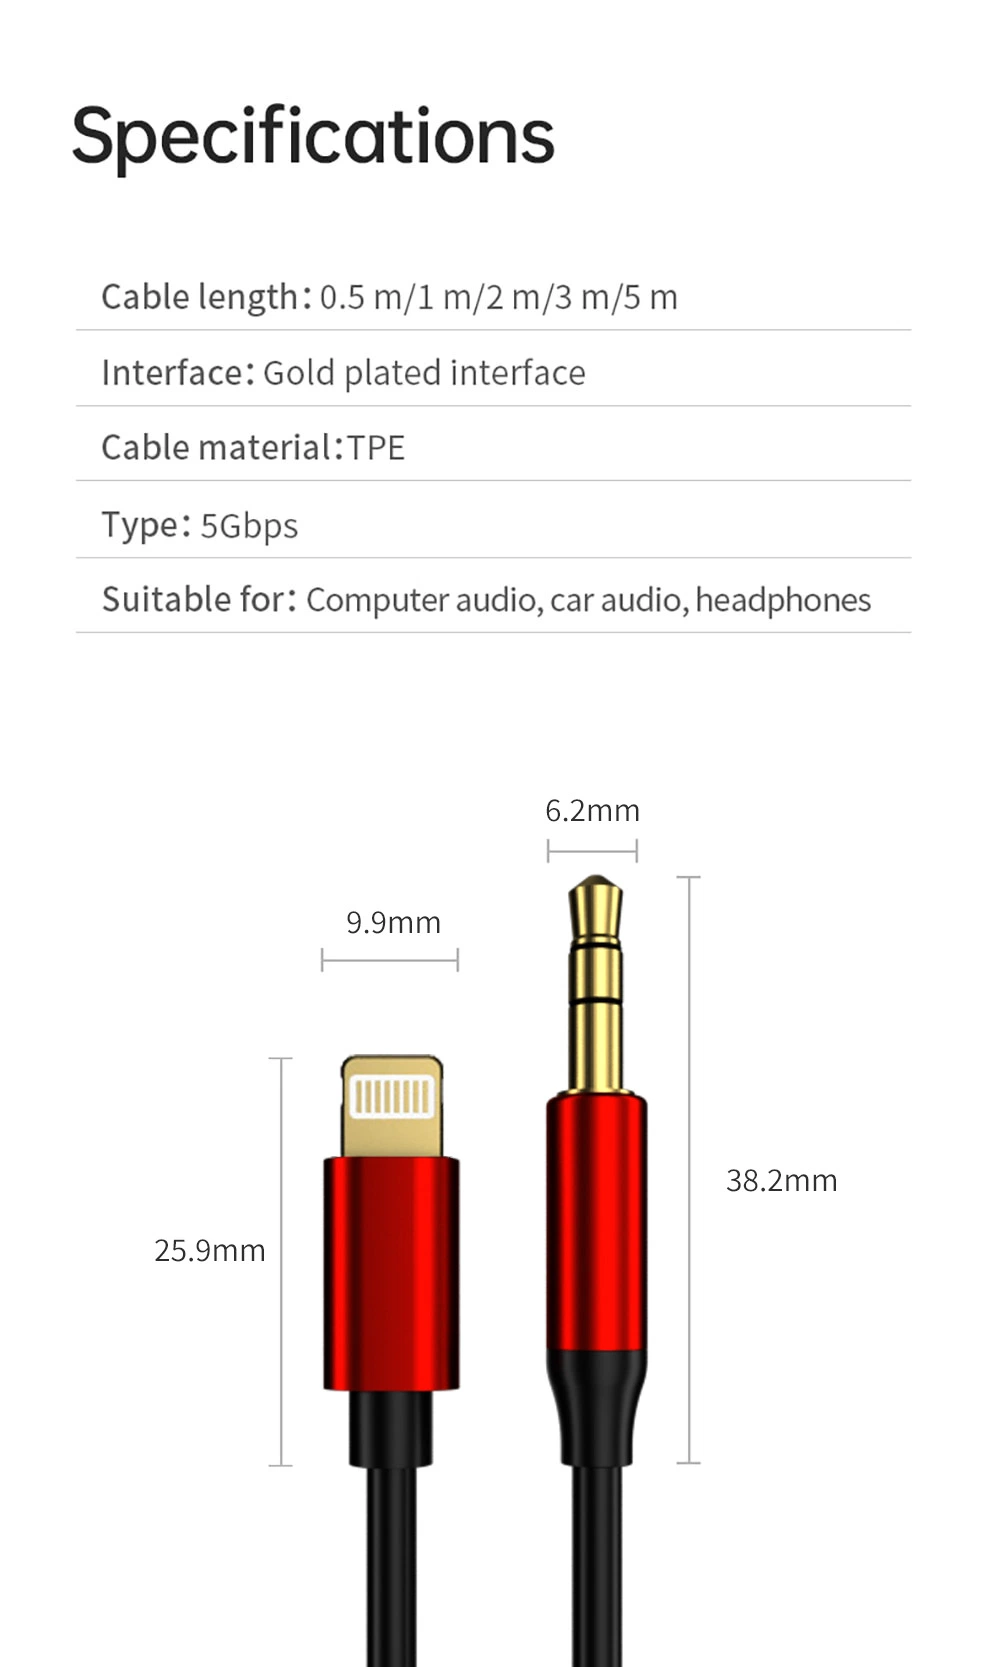 New Lightning to 3.5mm High Transmission Anti-Noise Aux Interface Aluminum Alloy Headphone Car Speaker Audio Cable